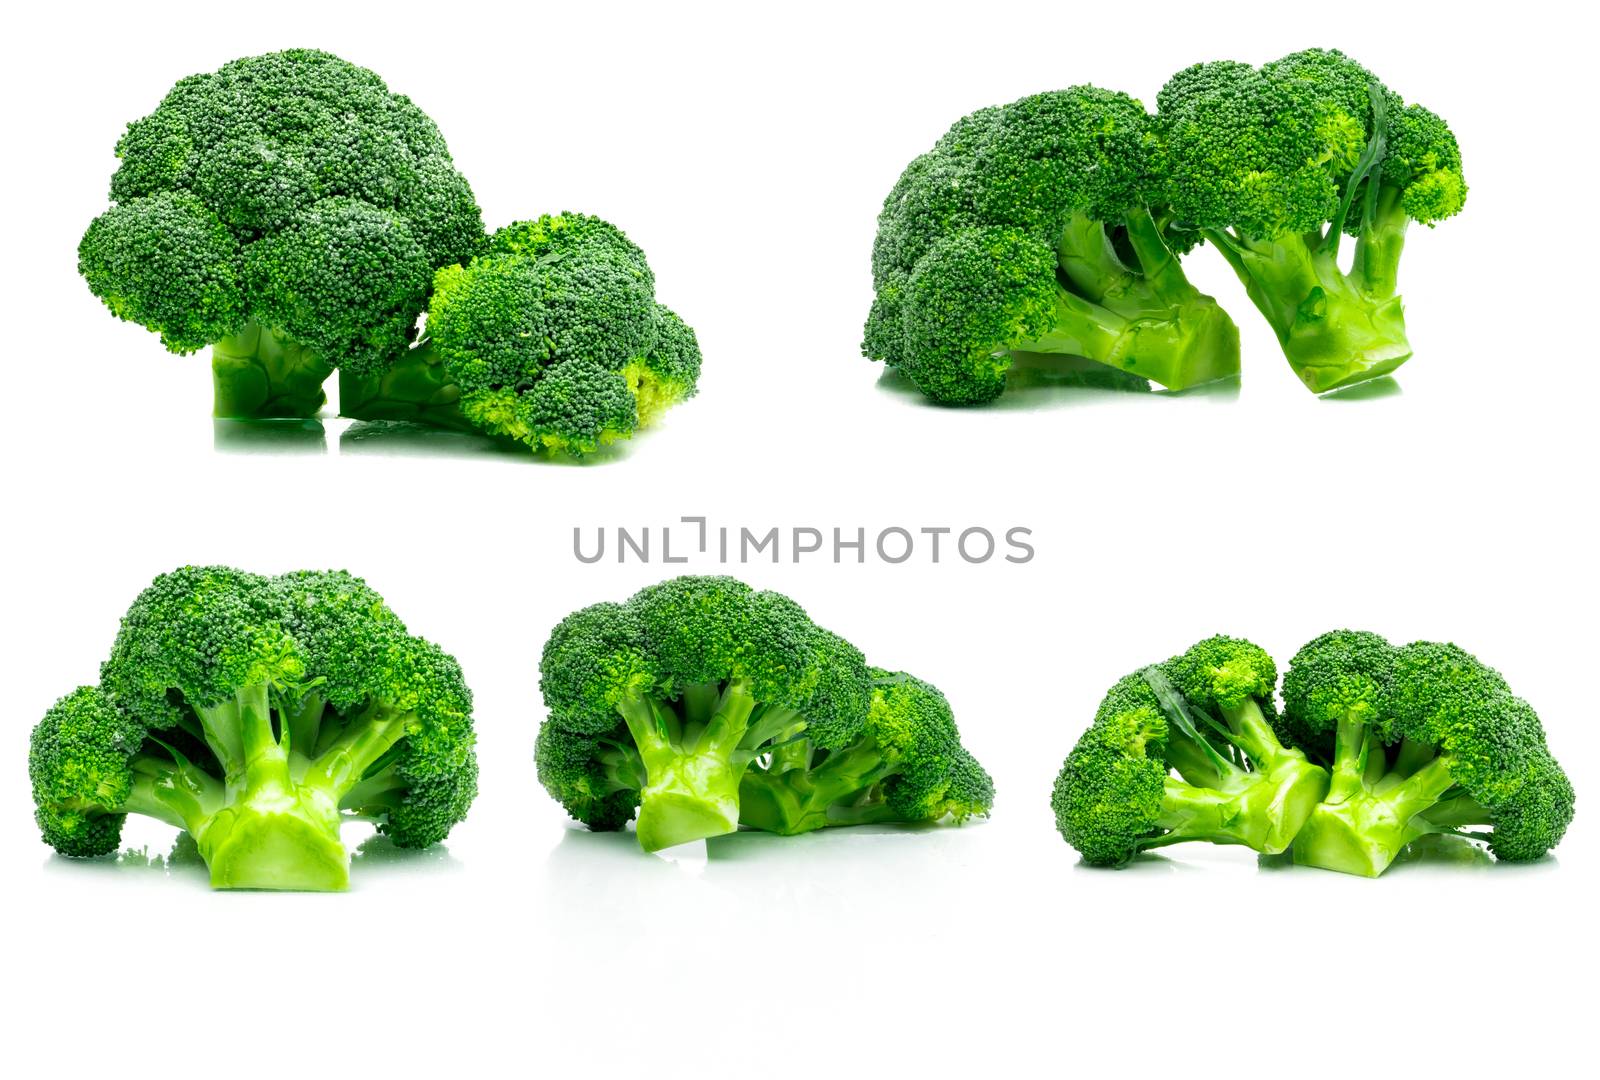 Set of green broccoli (Brassica oleracea). Vegetables natural source of betacarotene, vitamin c, vitamin k, fiber food, folate. Fresh broccoli cabbage isolated on white background. by Fahroni